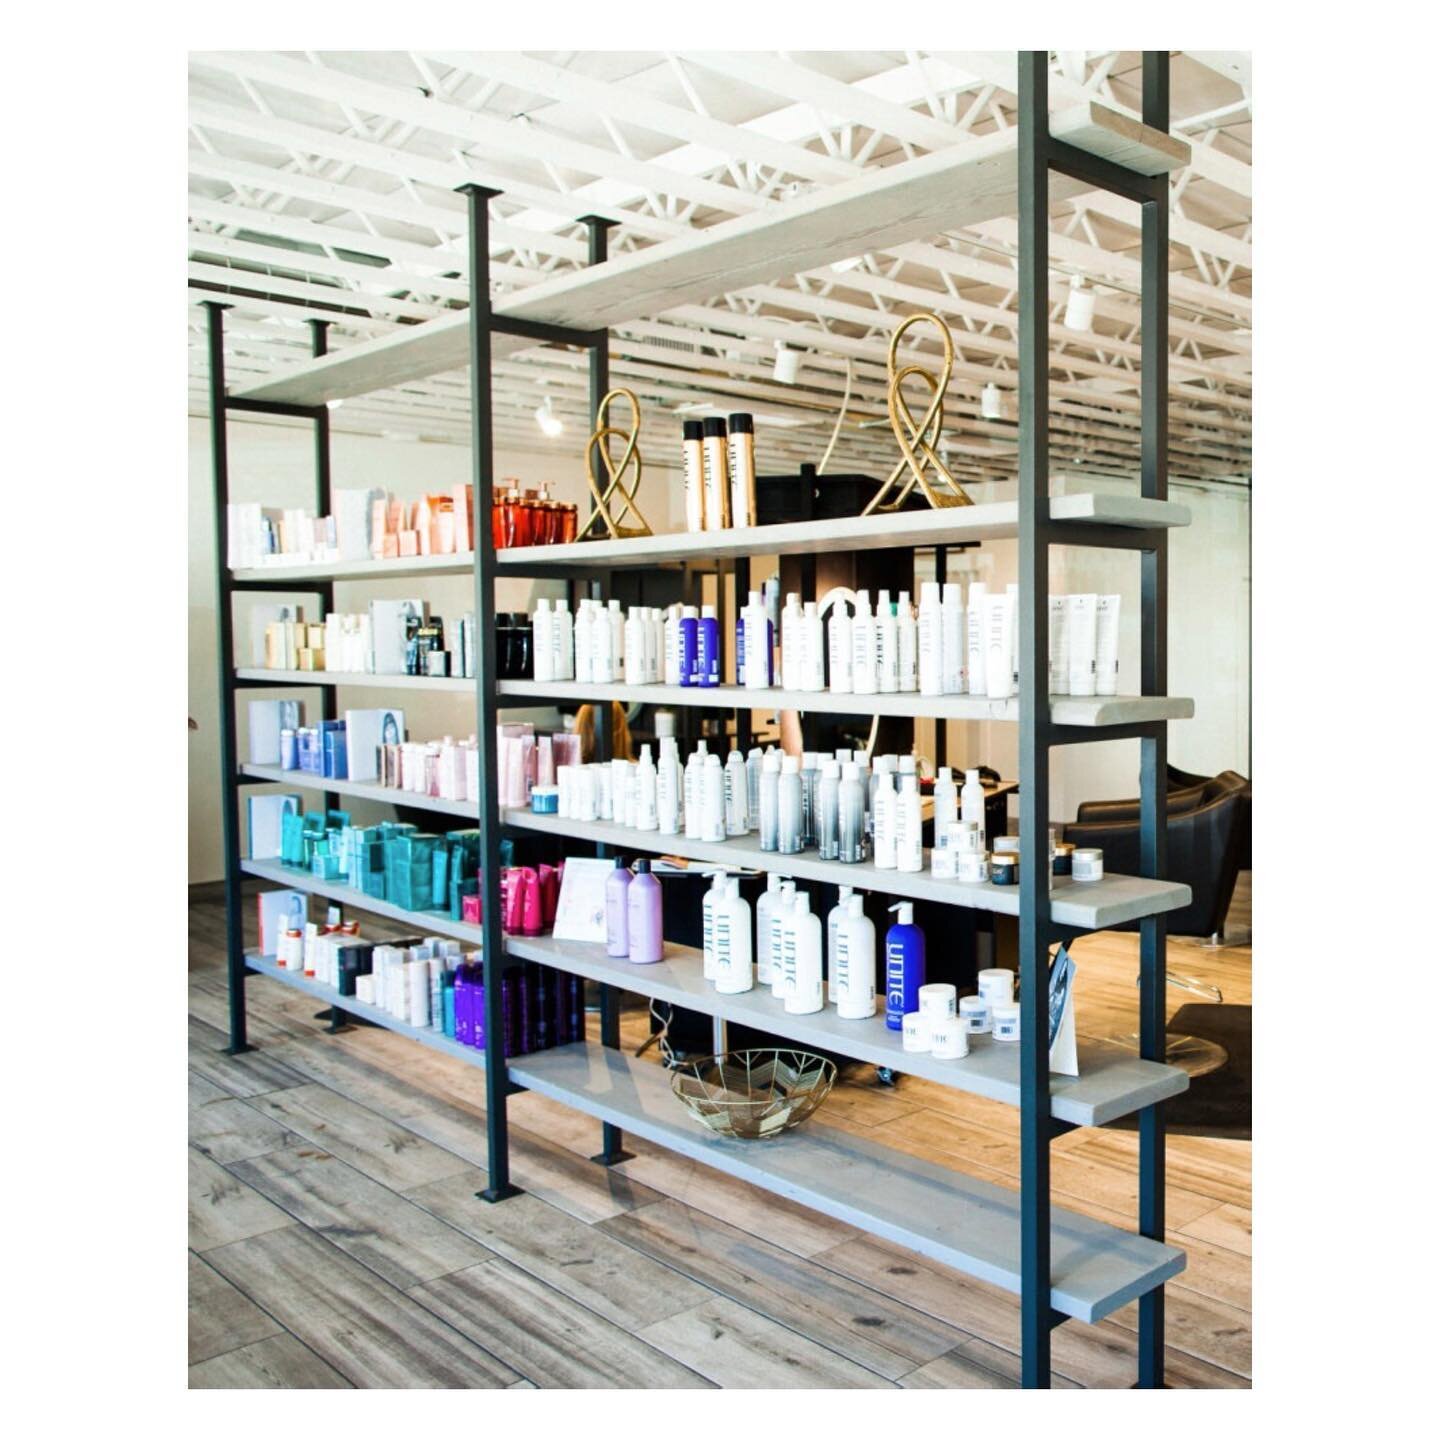 Looking for a new routine with your hair care? Or running out of your fav @unite_hair or @kerastase_official products? Pop in the salon to replenish your favs or try something new! And don&rsquo;t be shy, we are always happy to help in selecting the 